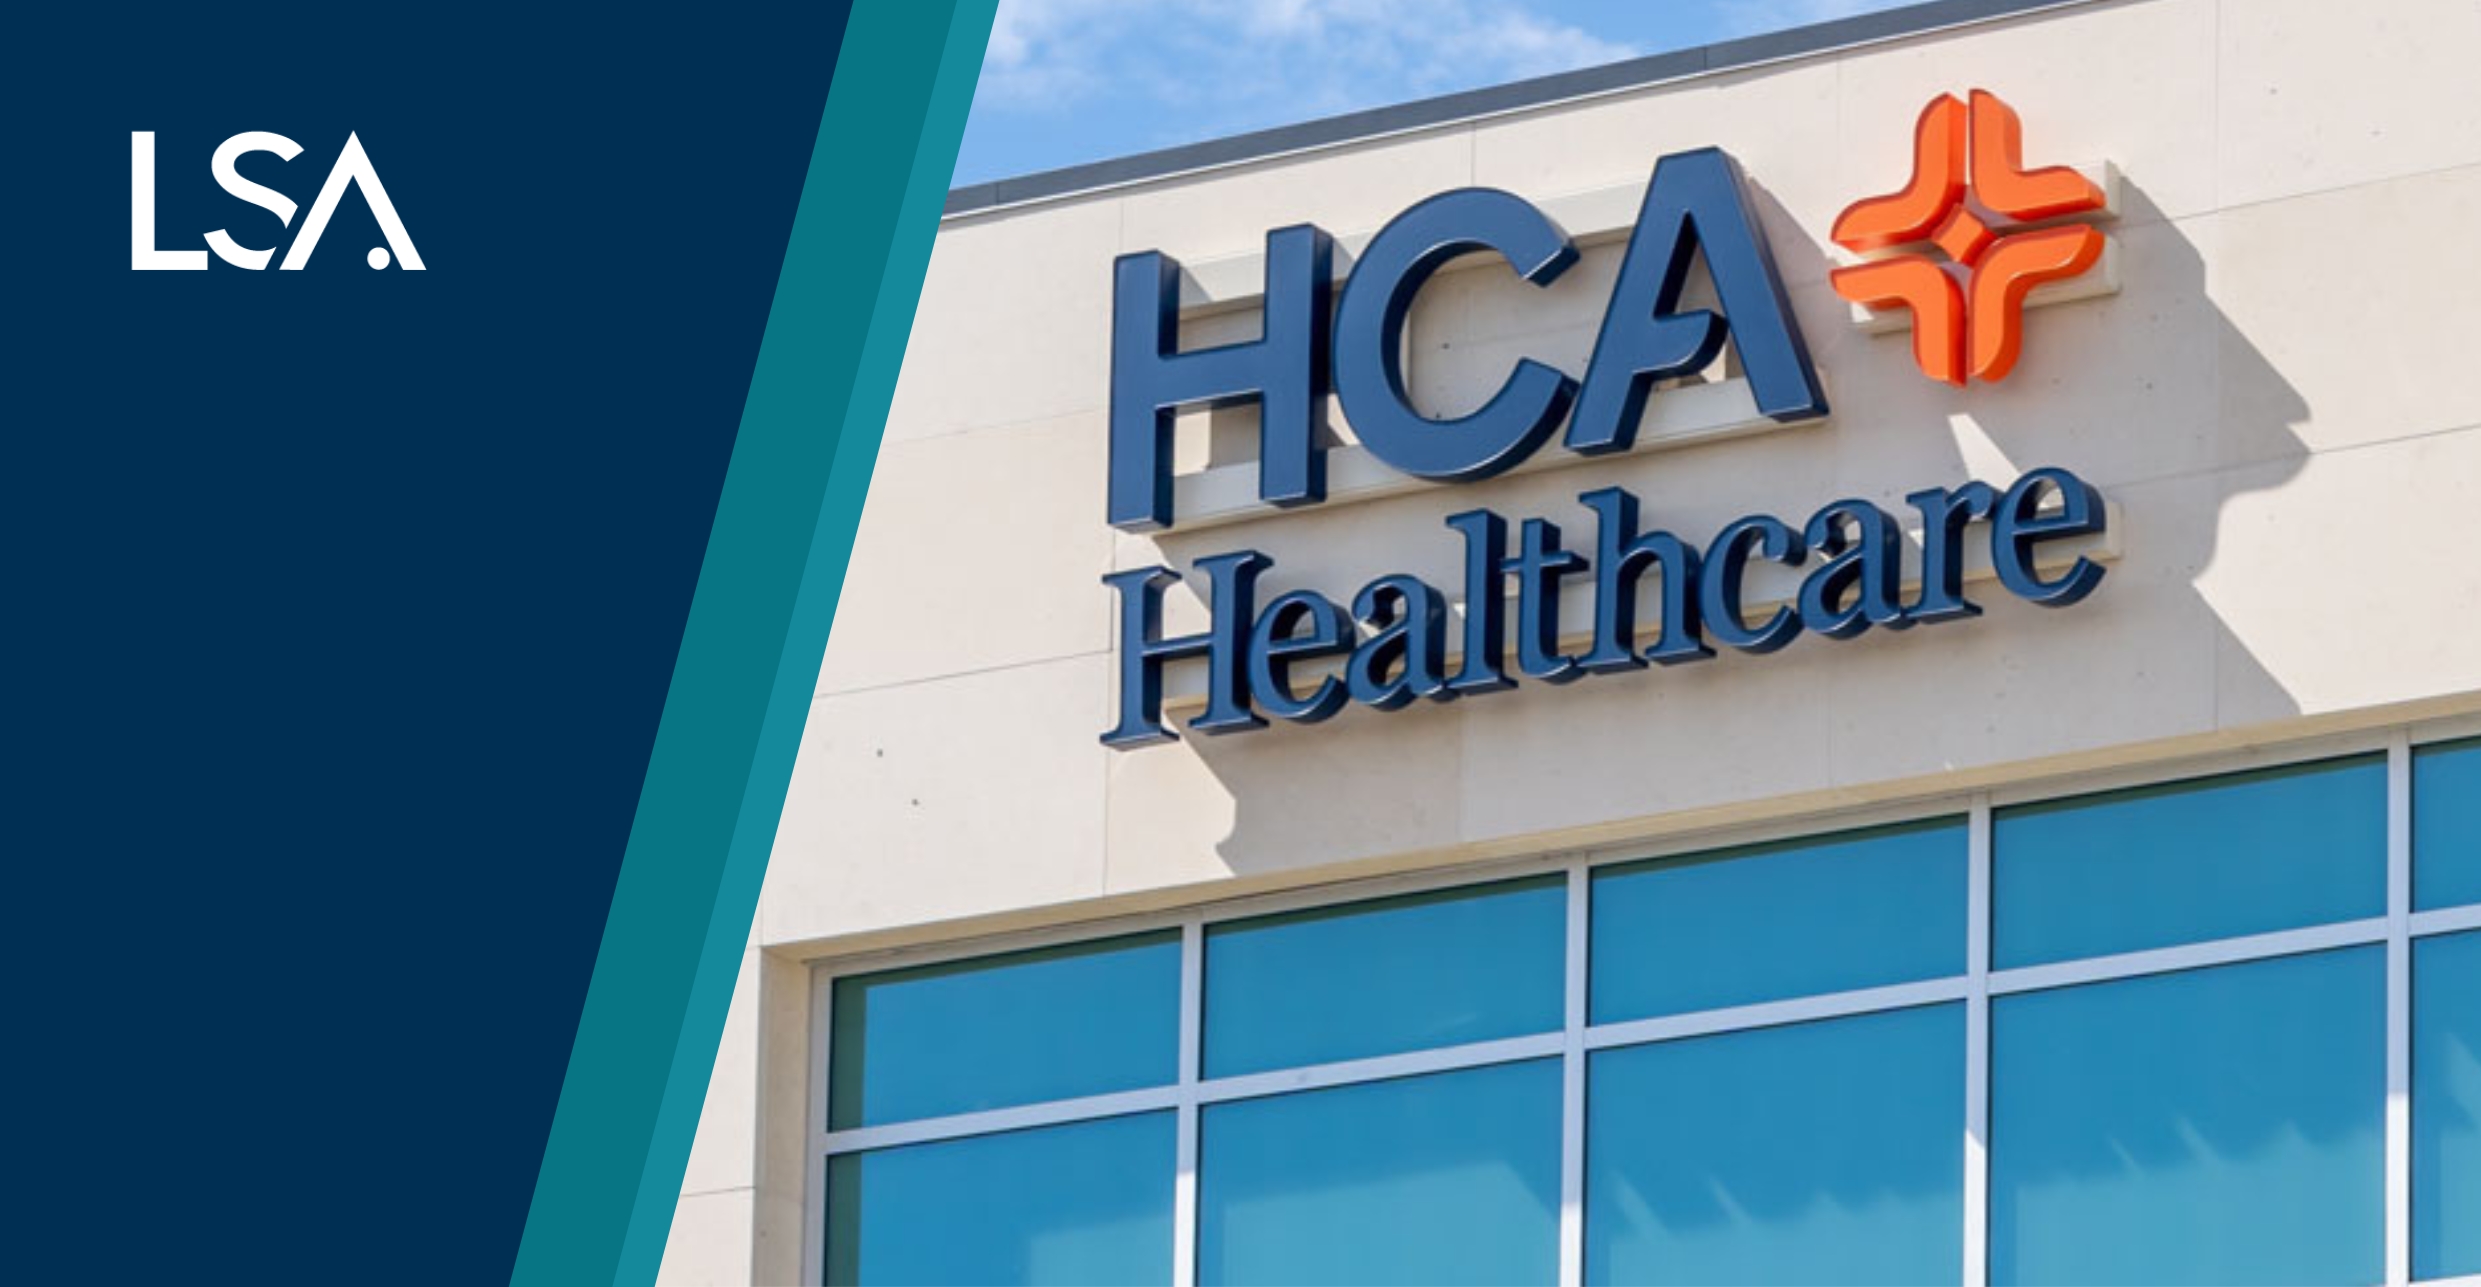 Language Services Associates, Inc. Awarded Divisional Agreements for Provision of Interpretation and Translation Services by HCA Healthcare